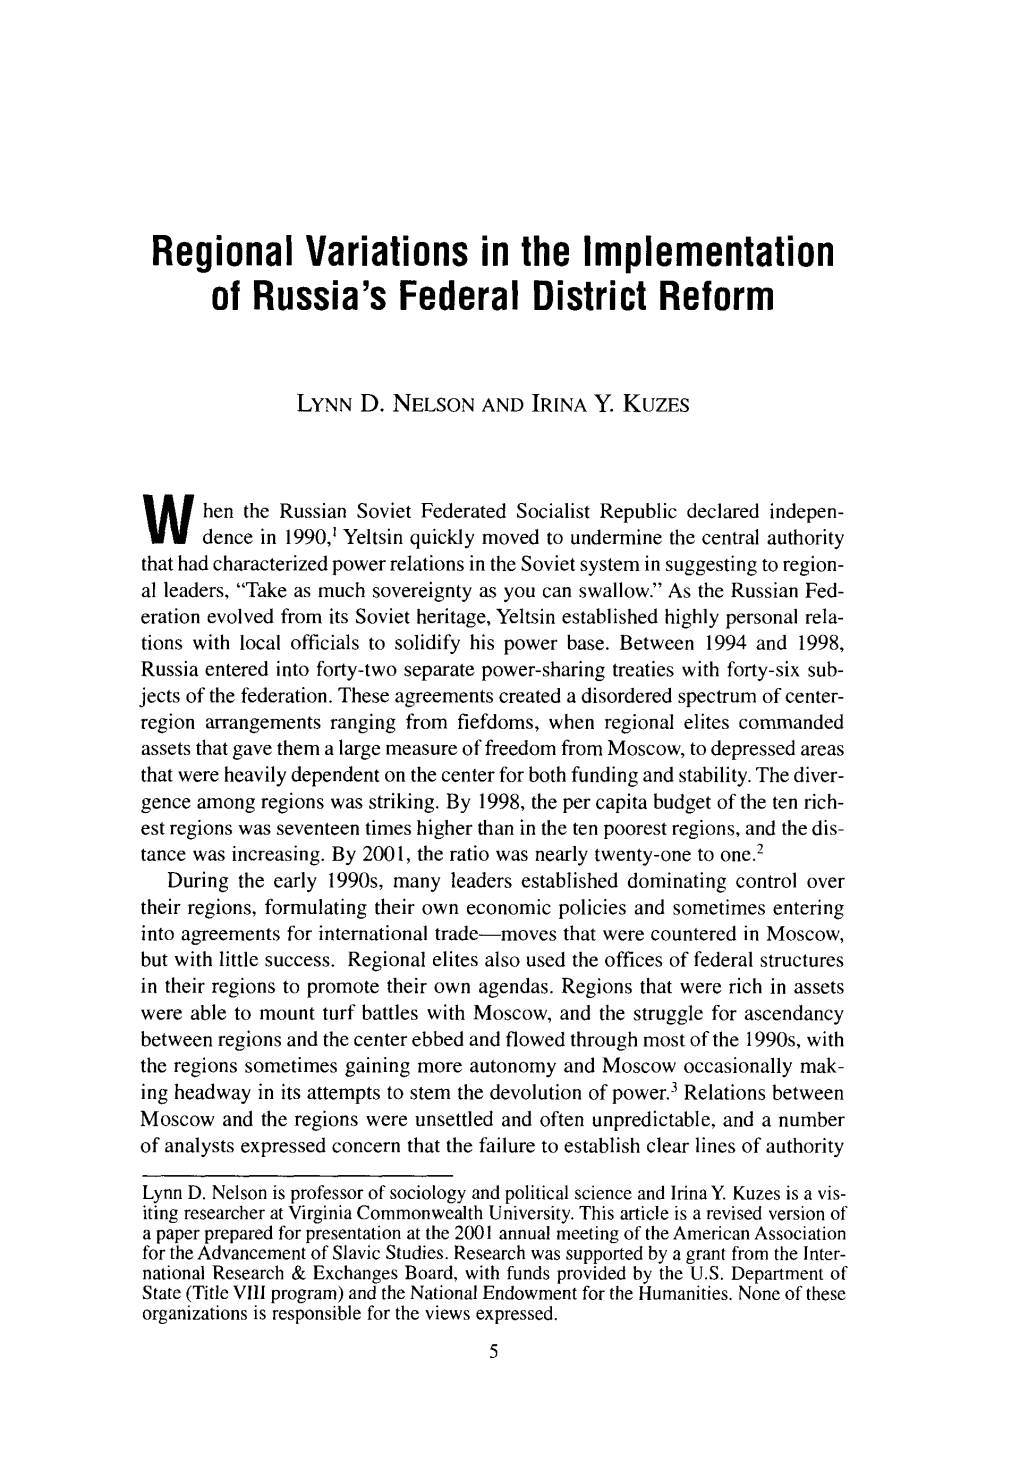 Regional Variations in the Implementation of Russia's Federal